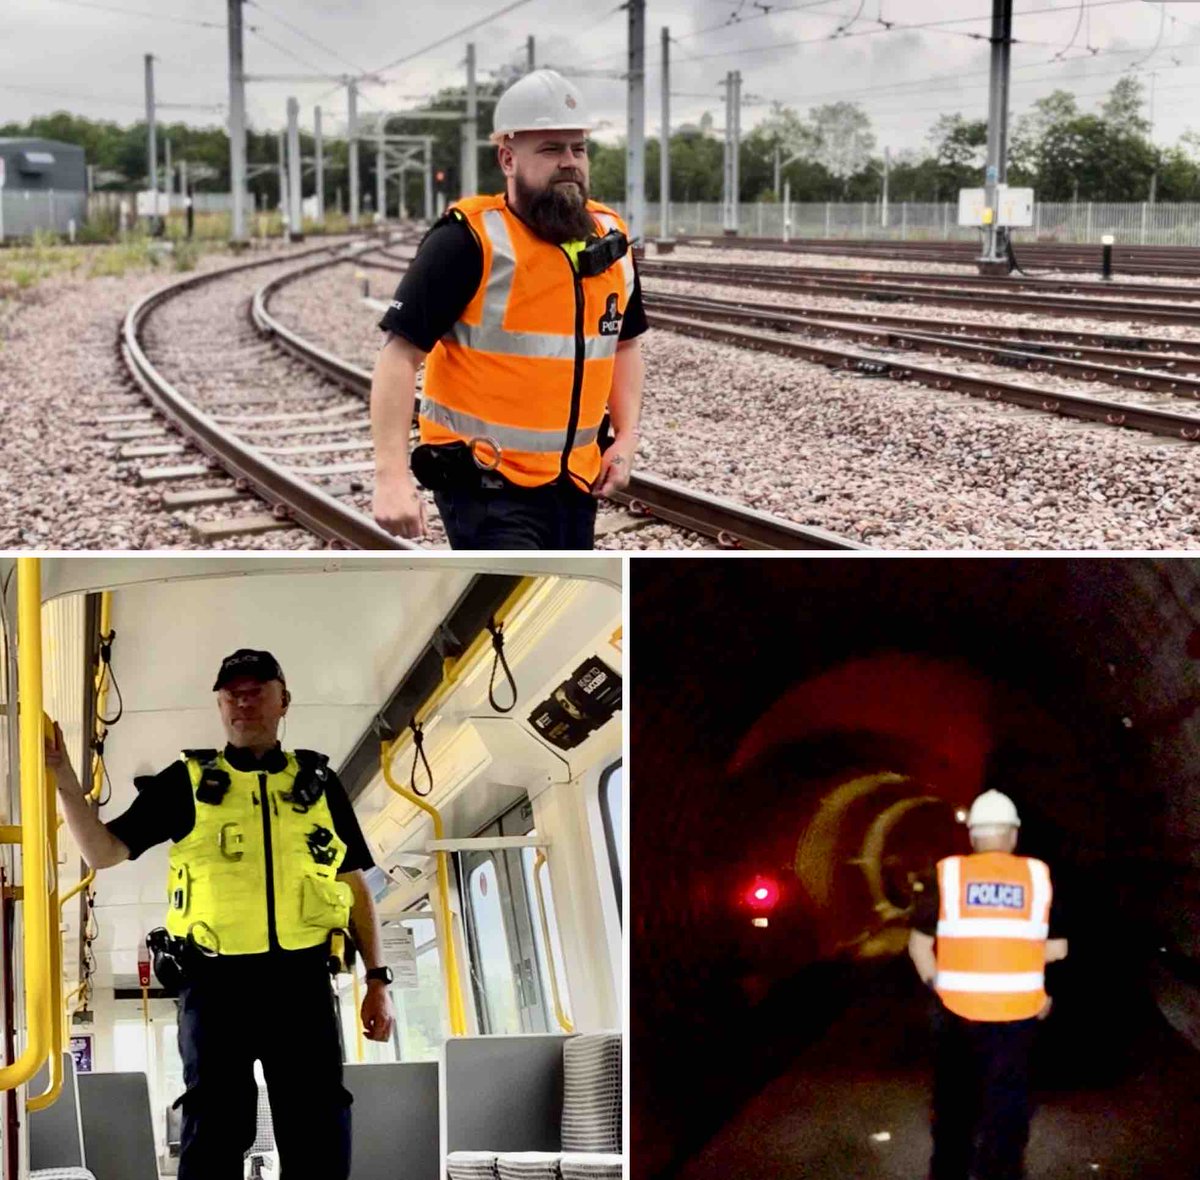 #MetroNPT In Partnership with our @My_Metro colleague’s,officers target their patrols and engagement.Tackling anti social behaviour and to deter theft or damage to #Metro. #NorthumbriaPolice #Newcastle #NorthTyneside #Gateshead #SouthTyneside #Nexus #TyneWear #KeepingMetroSafe